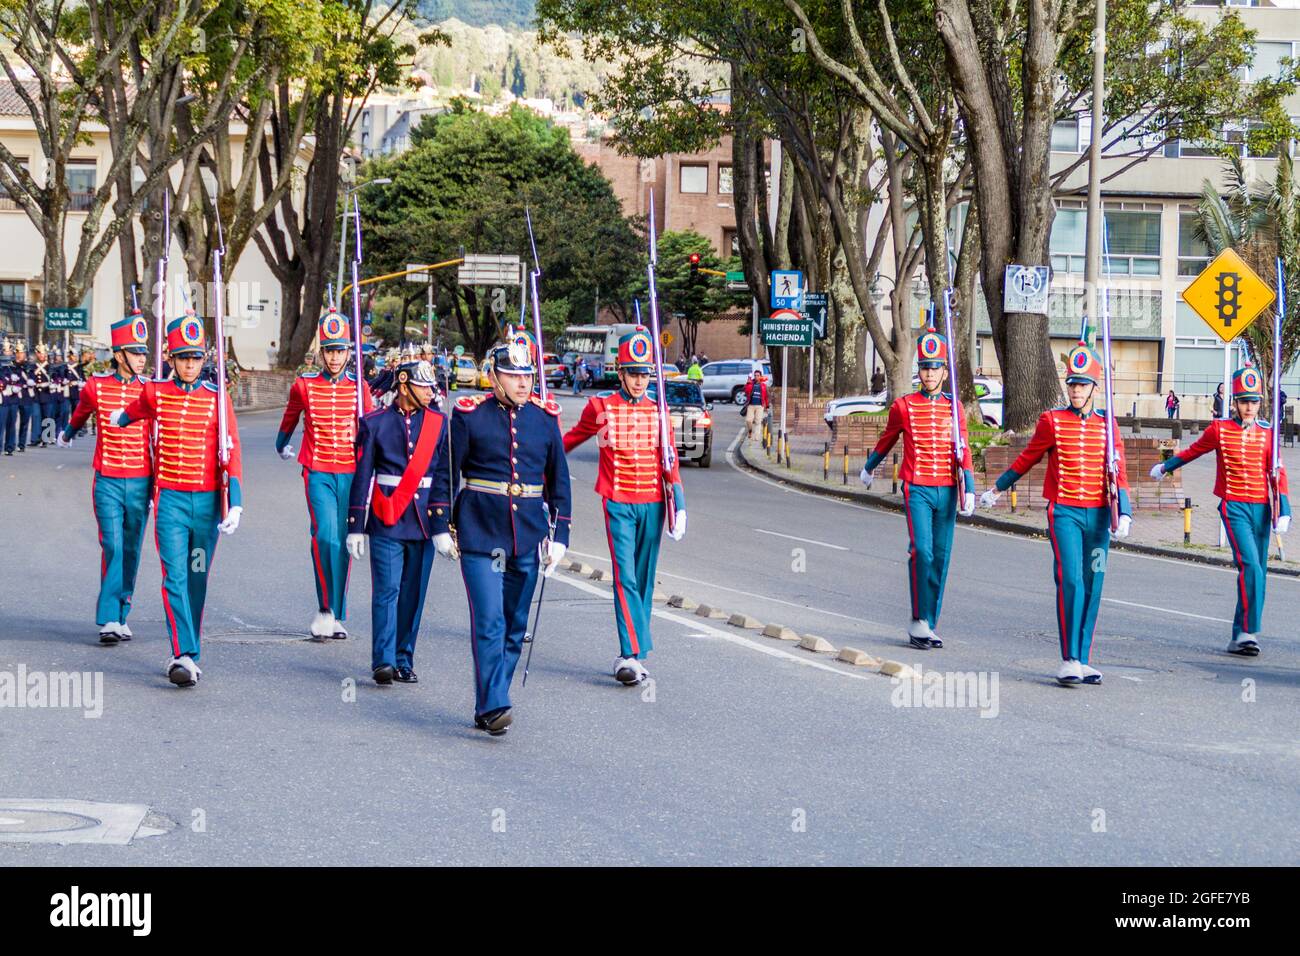 BOGOTA, COLOMBIA - SEPTEMBER 23, 2015: Changing of the guard at House of Narino, official presidential seat in colombian capital Bogota. Stock Photo